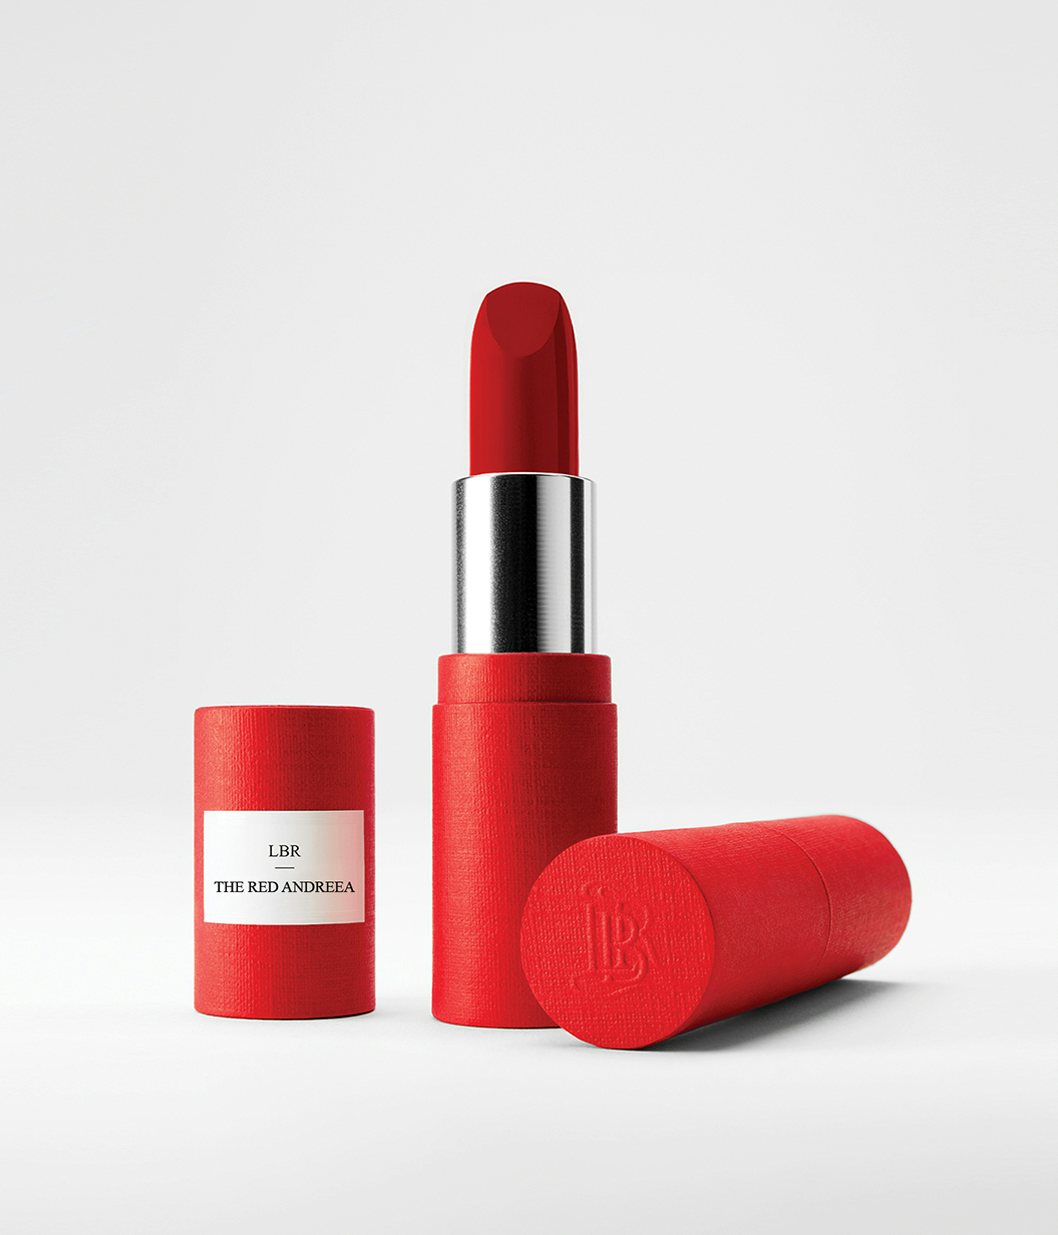 La bouche rouge The Red Andreea lipstick in the red paper case